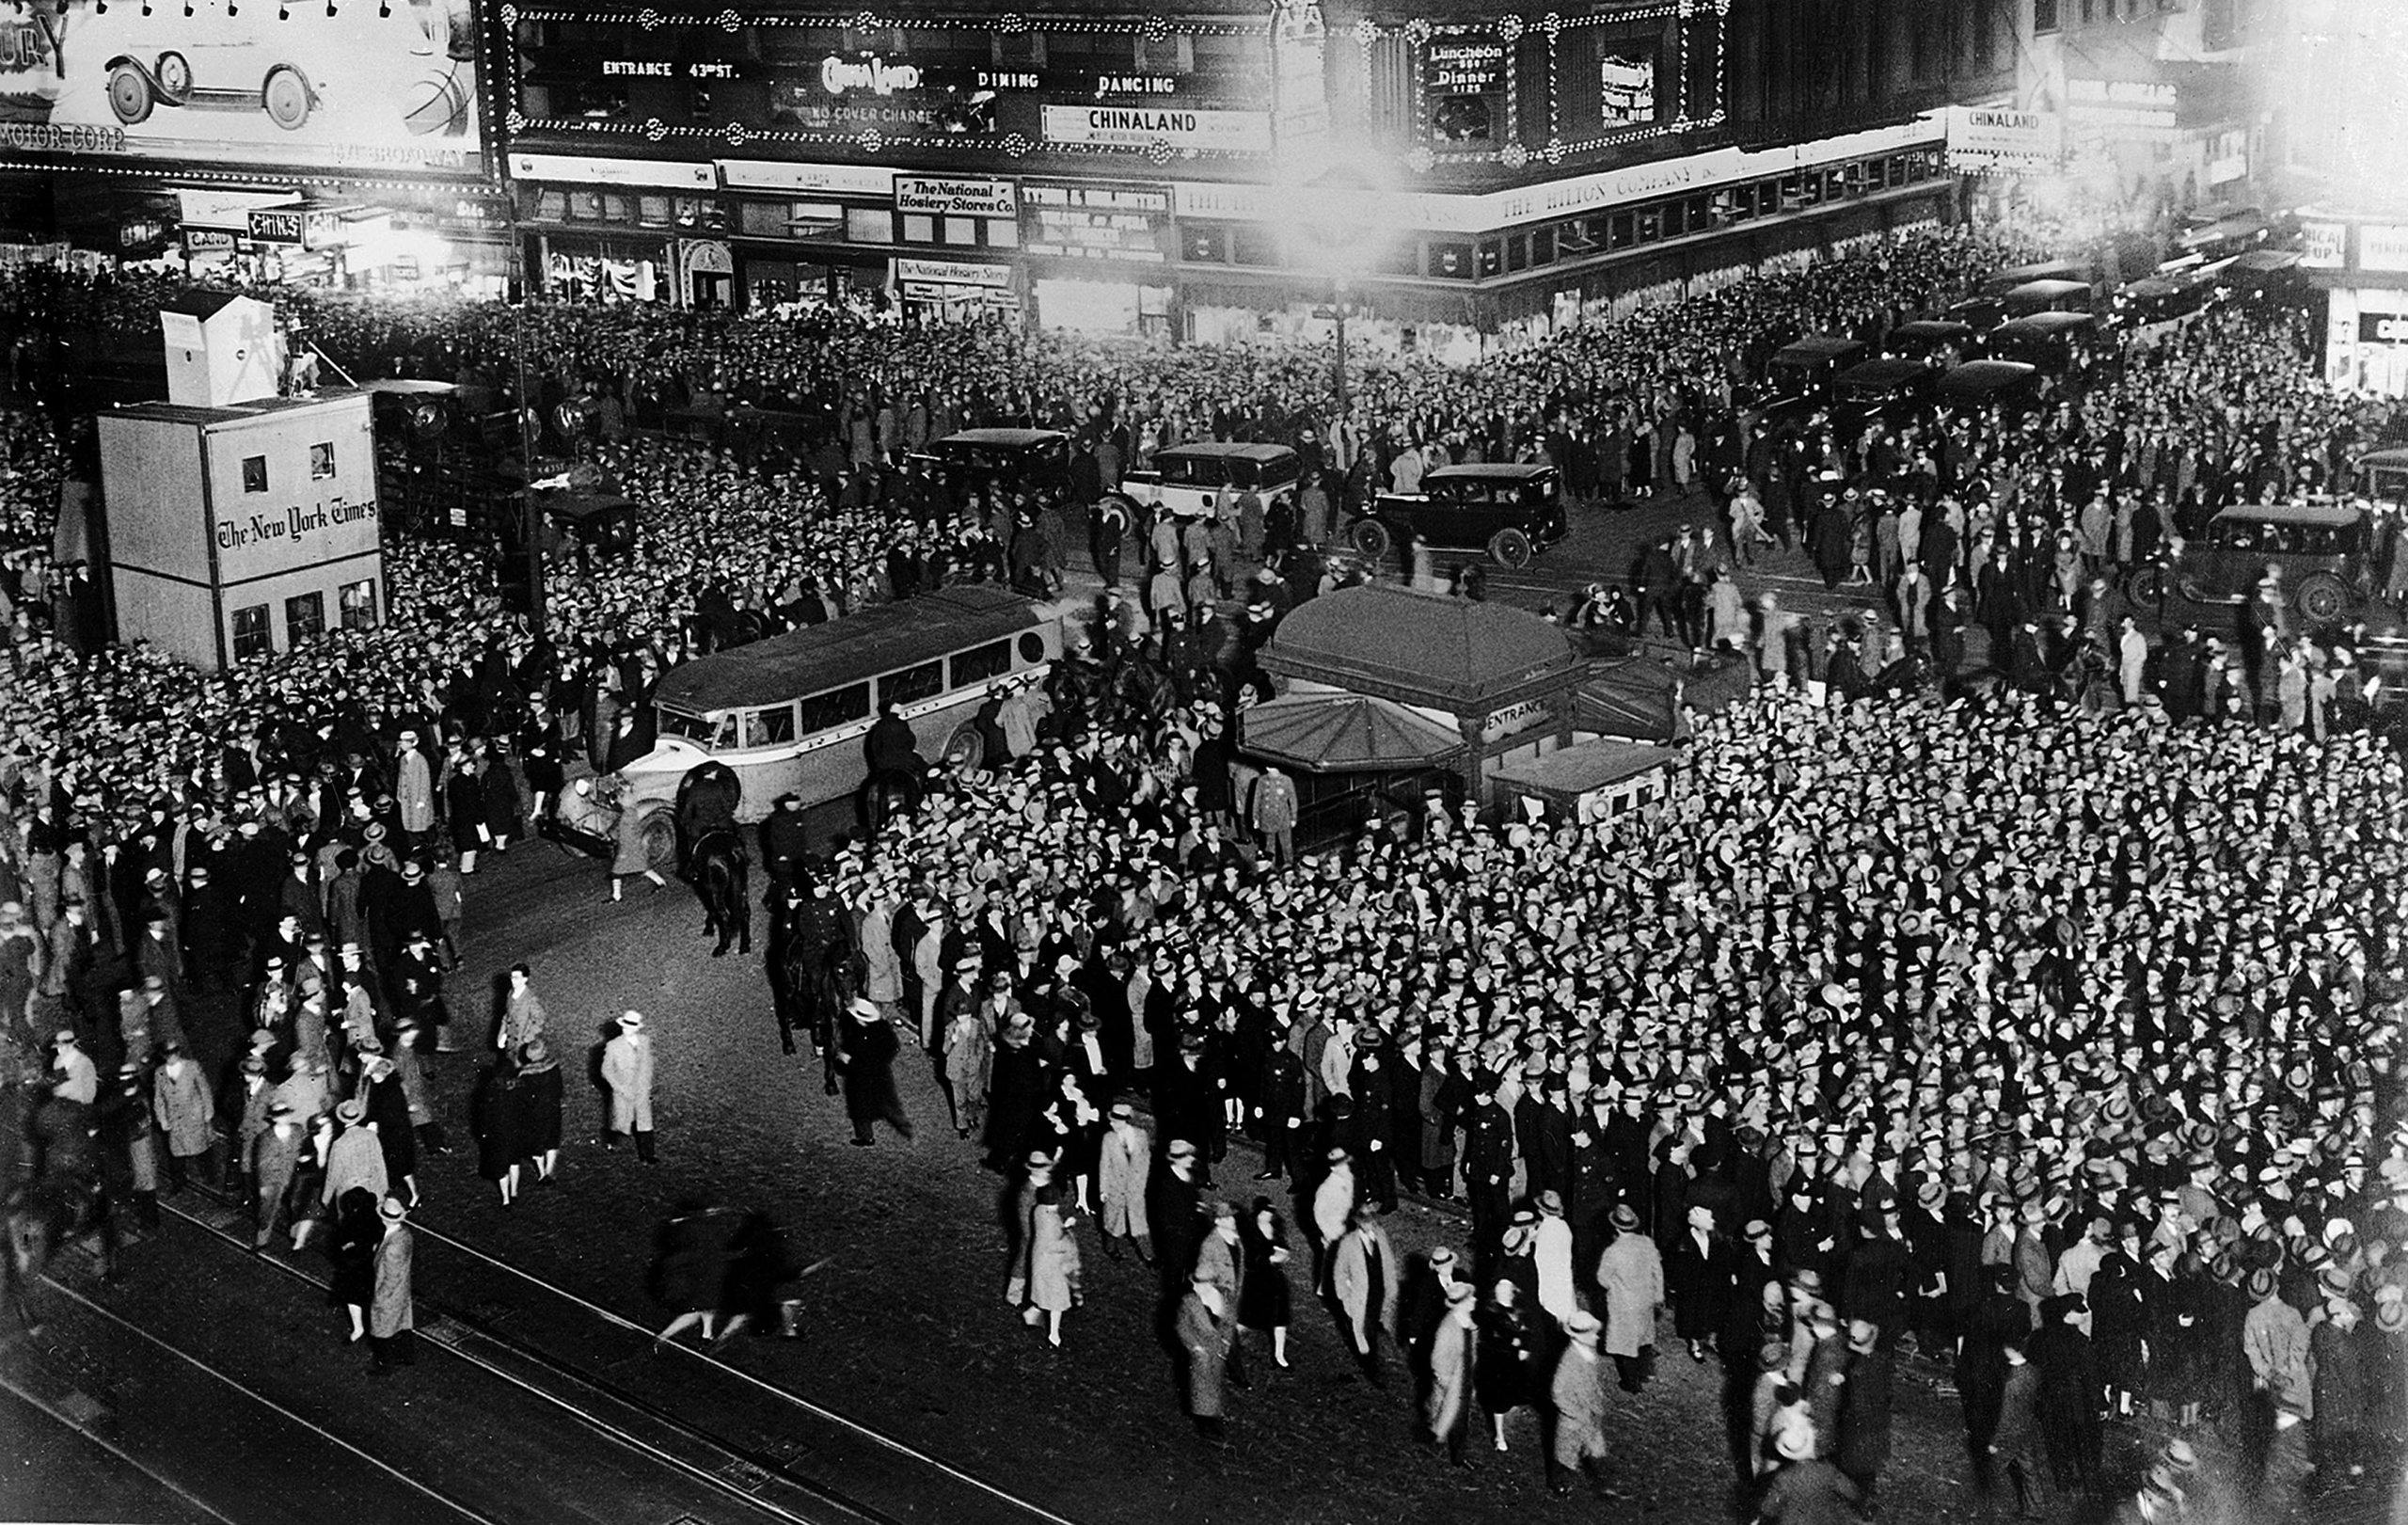 A crowd of people gathered in Times Square to watch the returns of the election to decide the new American President on Nov. 13, 1928. President-elect Herbert Hoover was returned with an overwhelming majority.